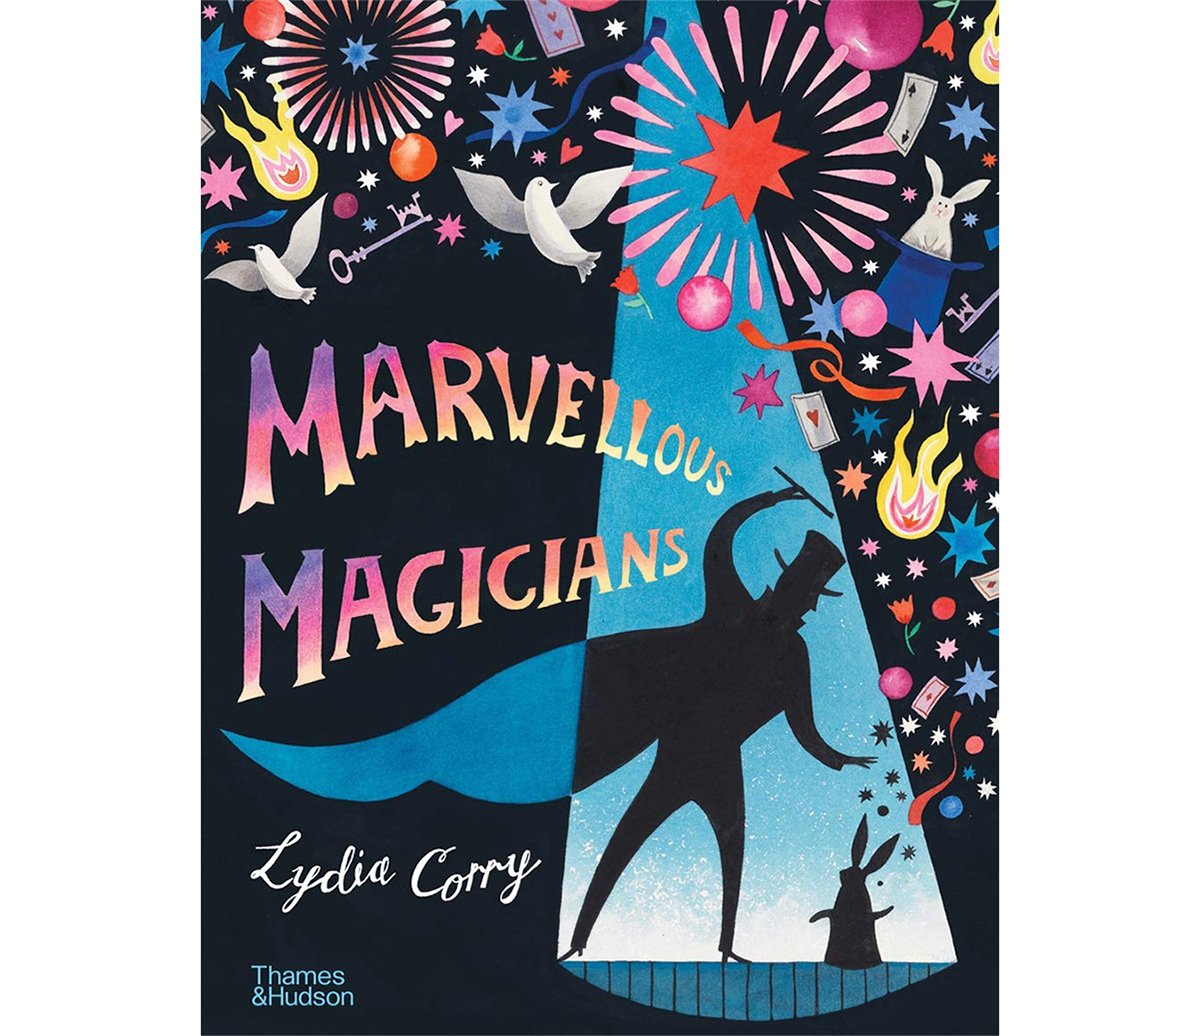 lydia-corry-marvellous-magicians-cover.jpg